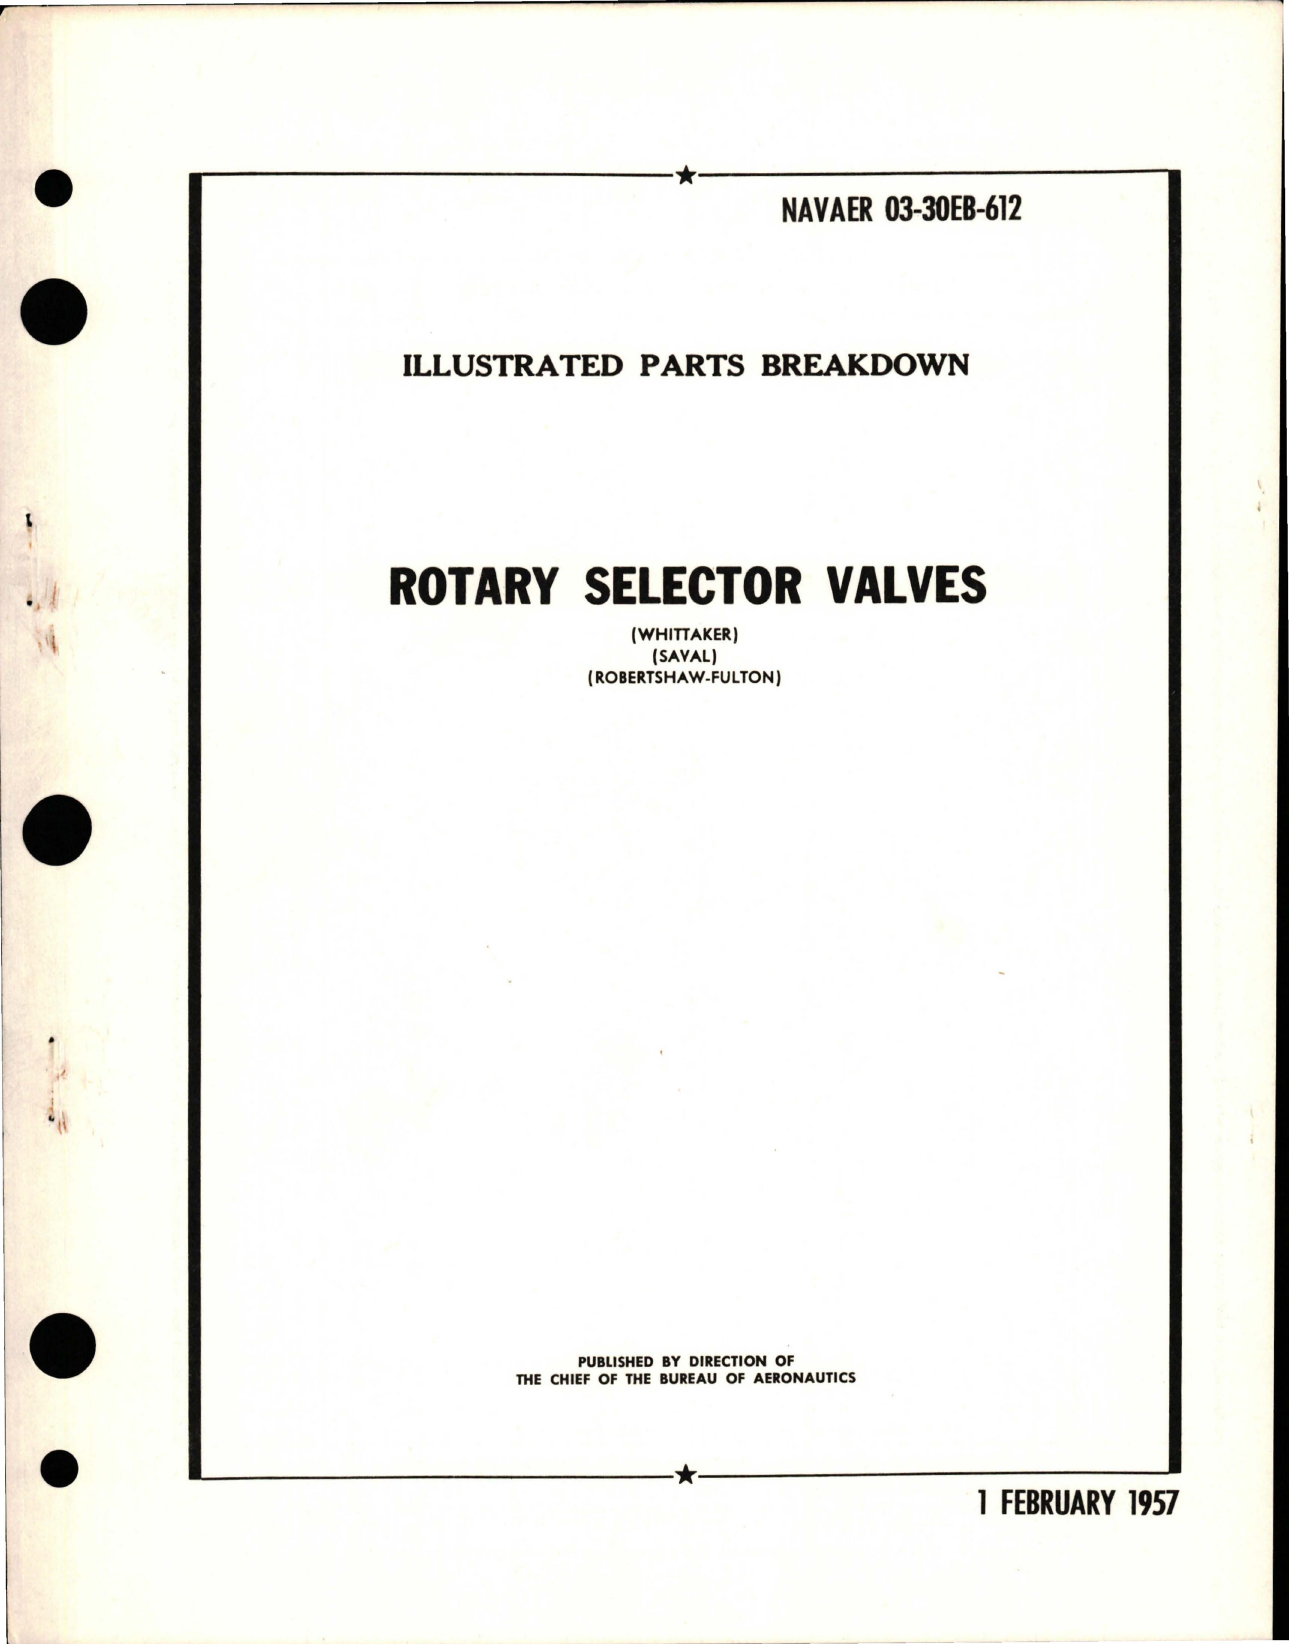 Sample page 1 from AirCorps Library document: Illustrated Parts Breakdown for Rotary Selector Valves